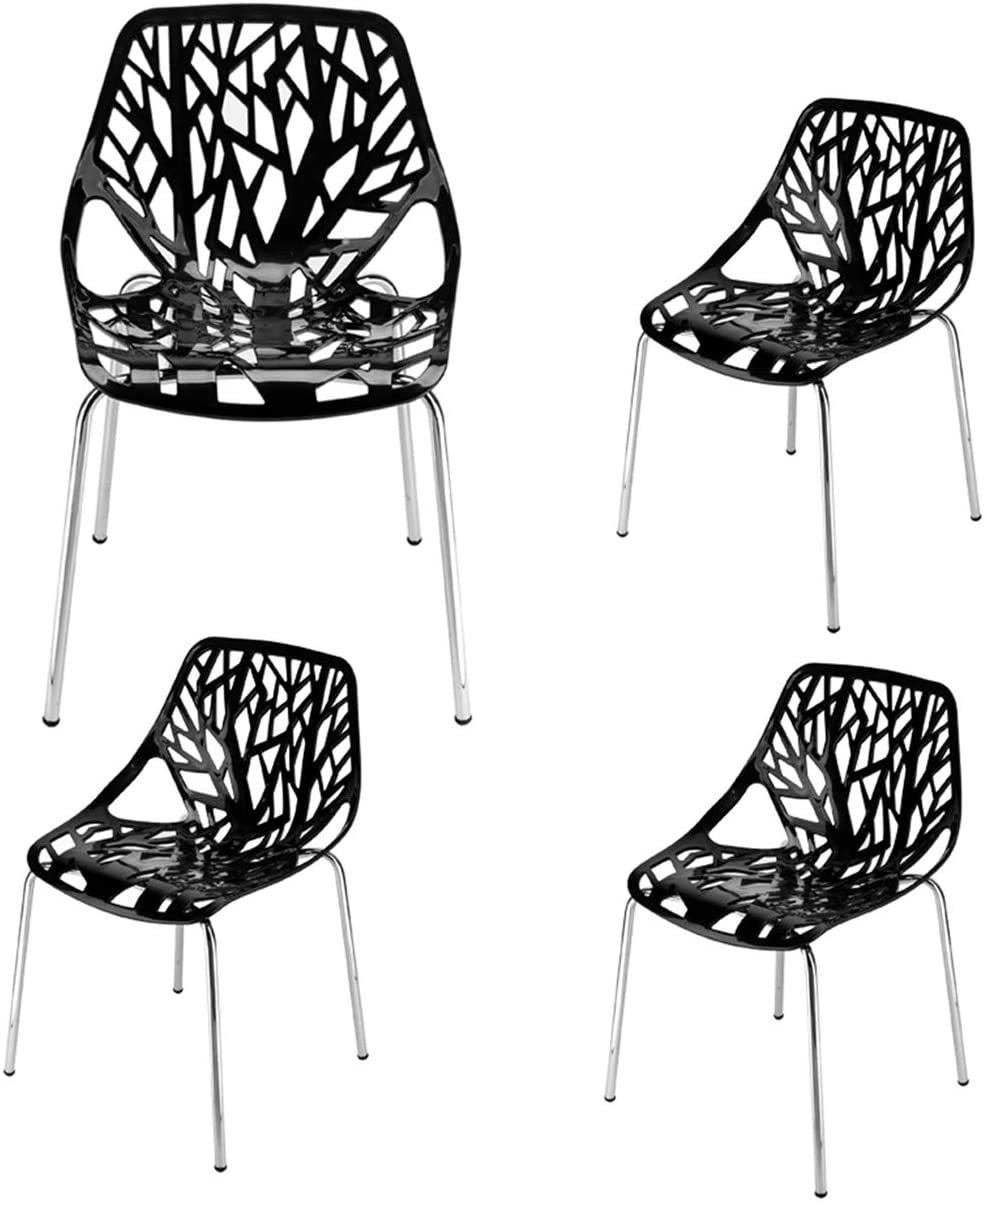 B08GC6V71R 4pcs Bird's Nest Style Lounge Chair Black Dining Chair Kitchen Chairs Modern Dining Room, Living Room Chairs